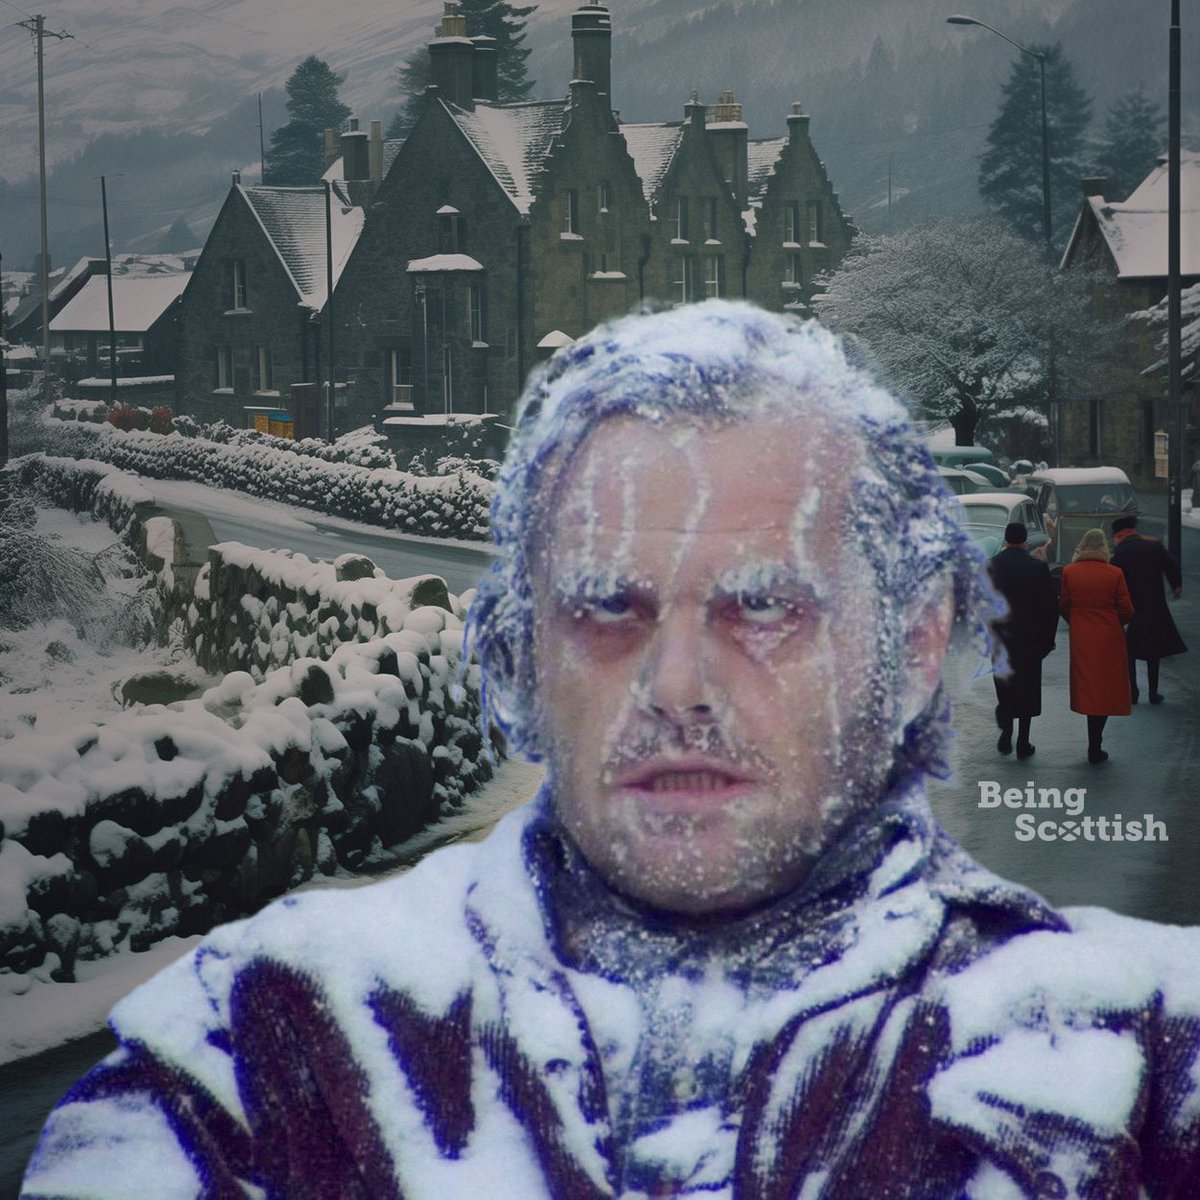 Shown is an exclusive selfie from Braemar on this day in 1982, when the coldest ever UK temperature of −27.2°C (−17.0°F) was recorded in the Aberdeenshire village ❄️